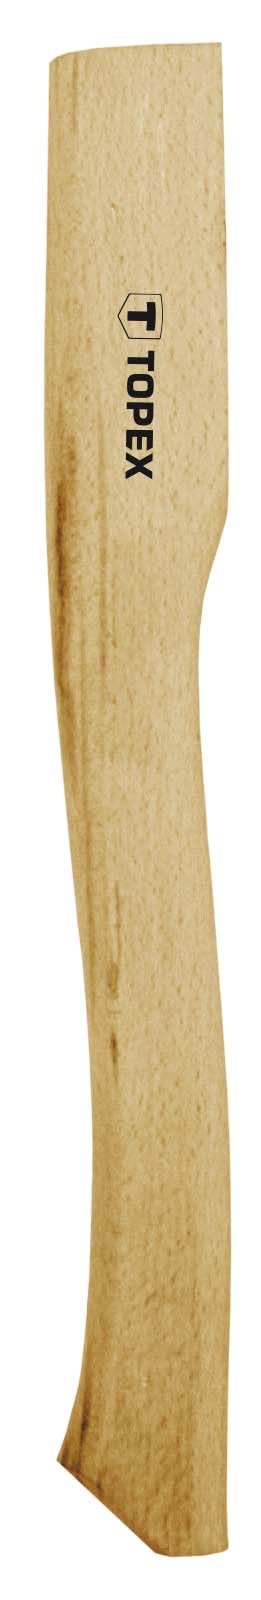 TOPEX AXES WOODEN HANDLE 360mm